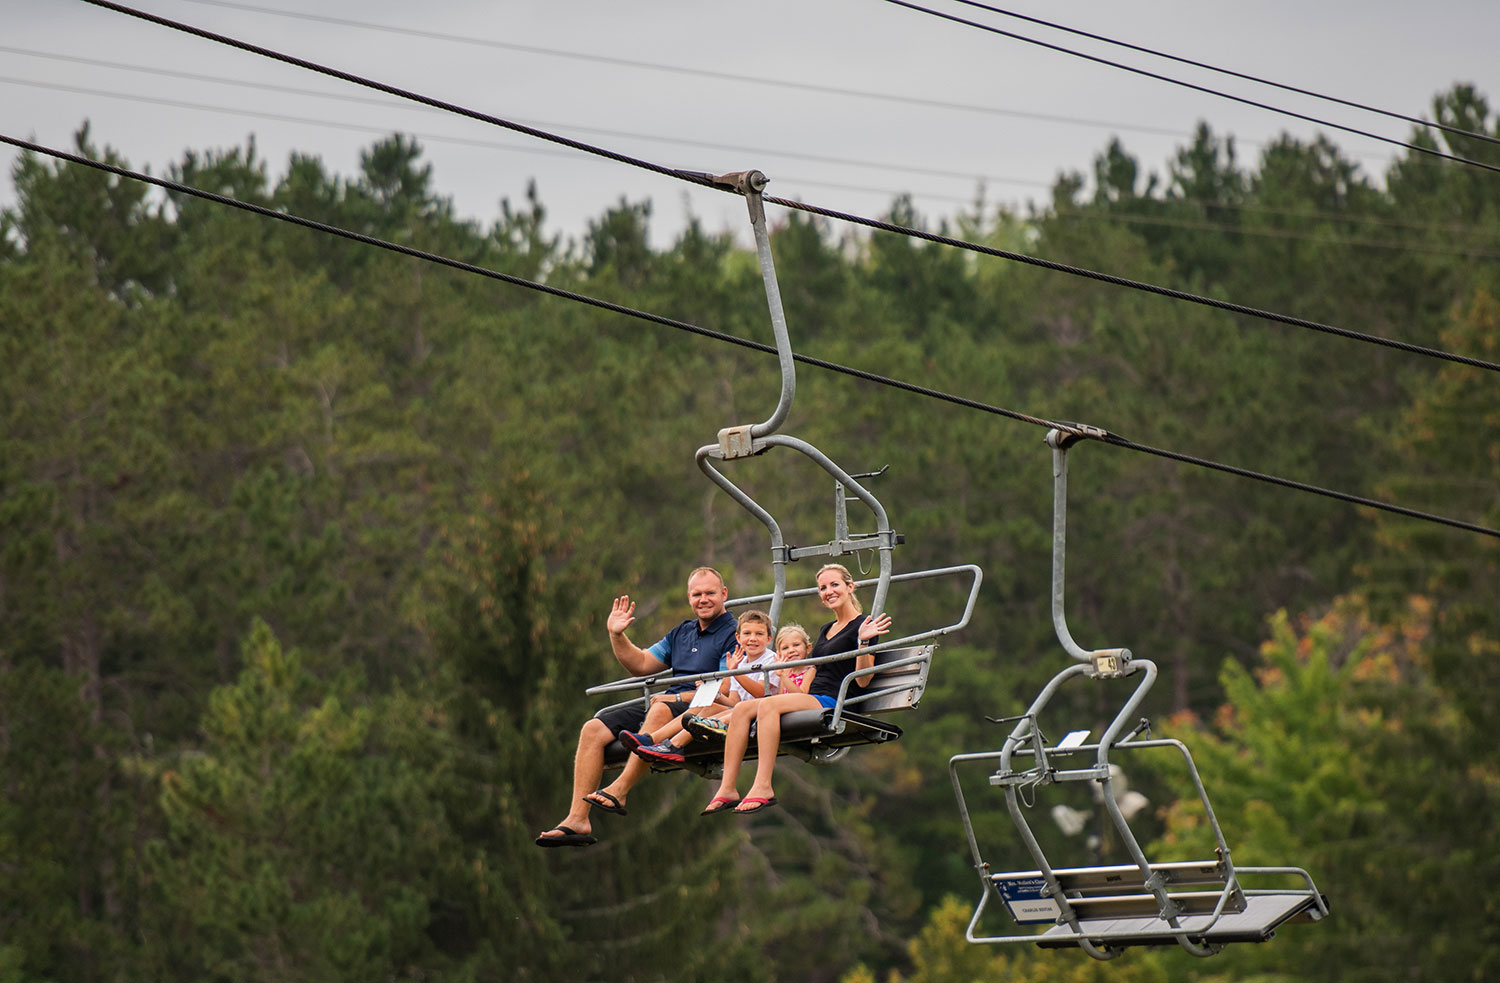 Scenic chair lift ride at Crystal Mountain Resort in northern Michigan